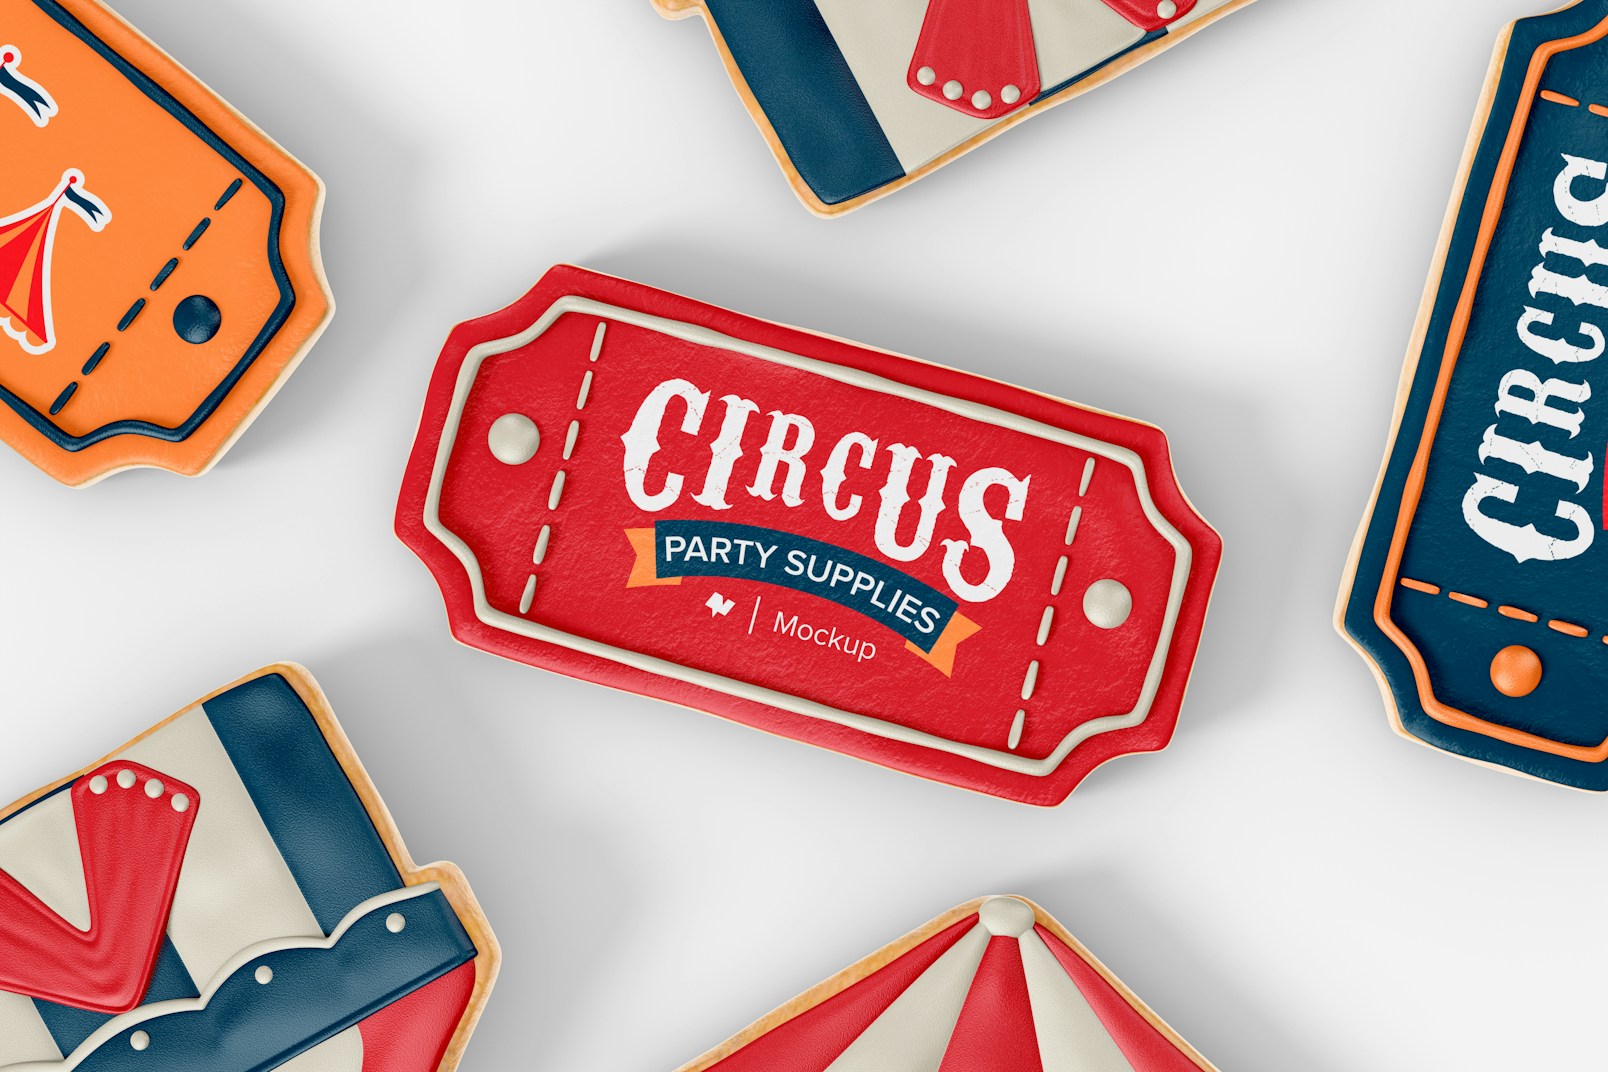 Circus Party Cookies Mockup, Top View